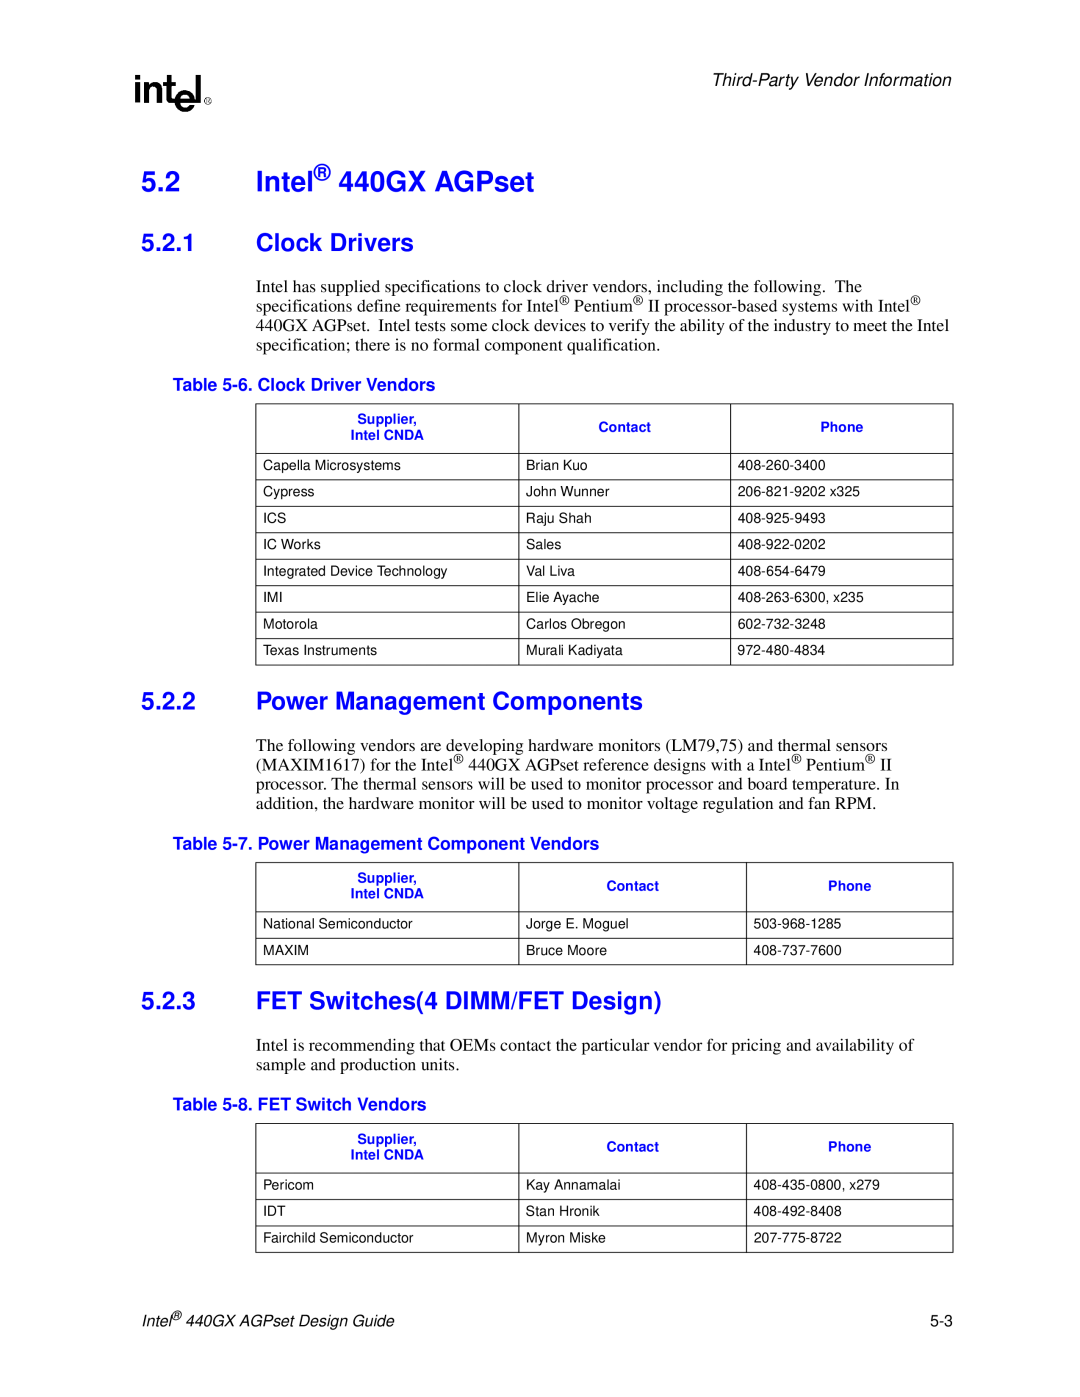 Intel manual Intel 440GX AGPset, Clock Drivers, Power Management Components, FET Switches4 DIMM/FET Design 